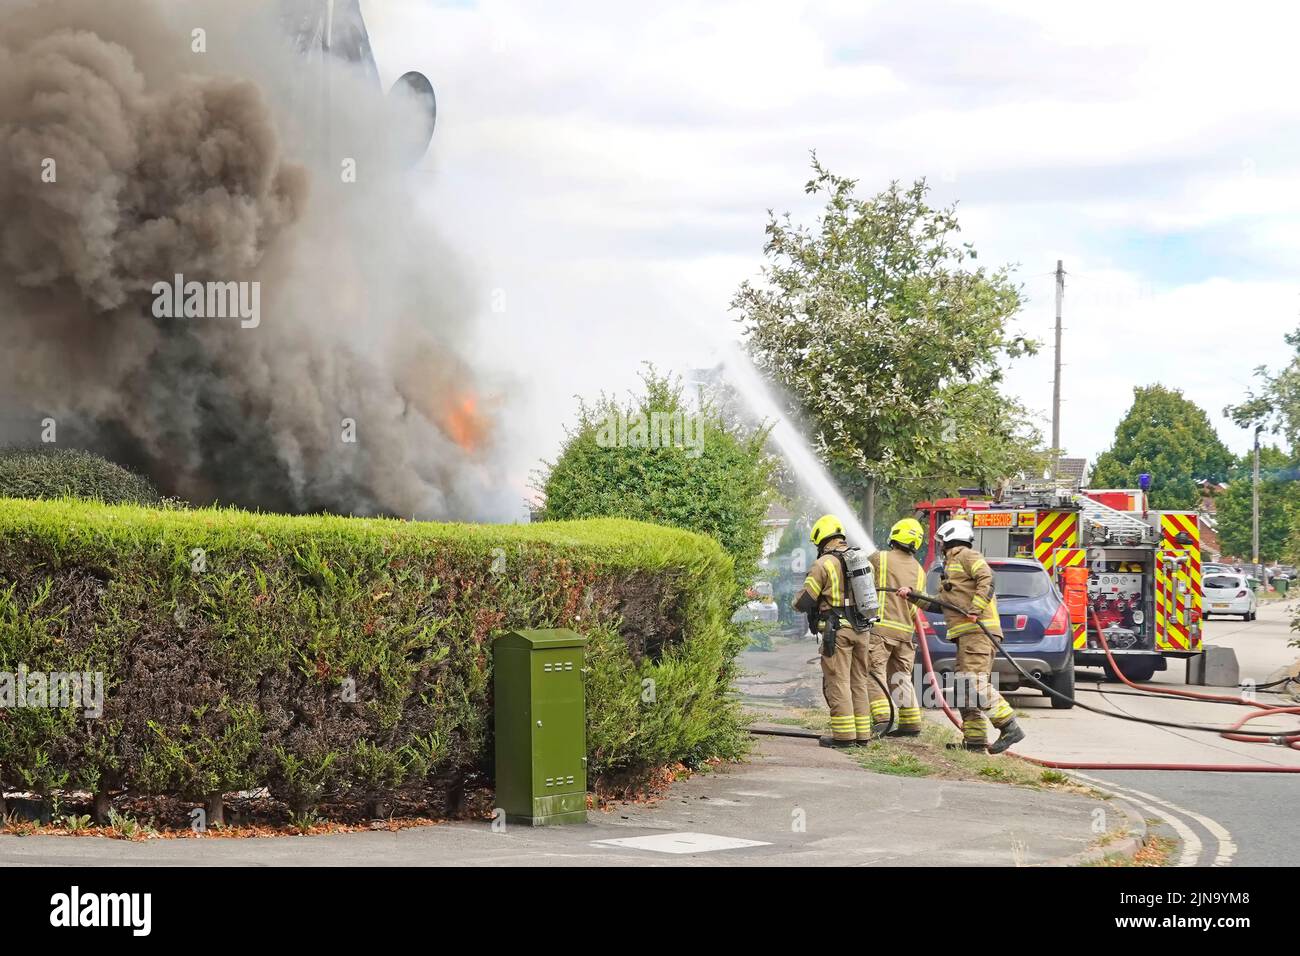 Essex Fire and Rescue Service fire engine & group of fire brigade firemen firefighters spraying water jet on house fire smoke and flames   England UK Stock Photo